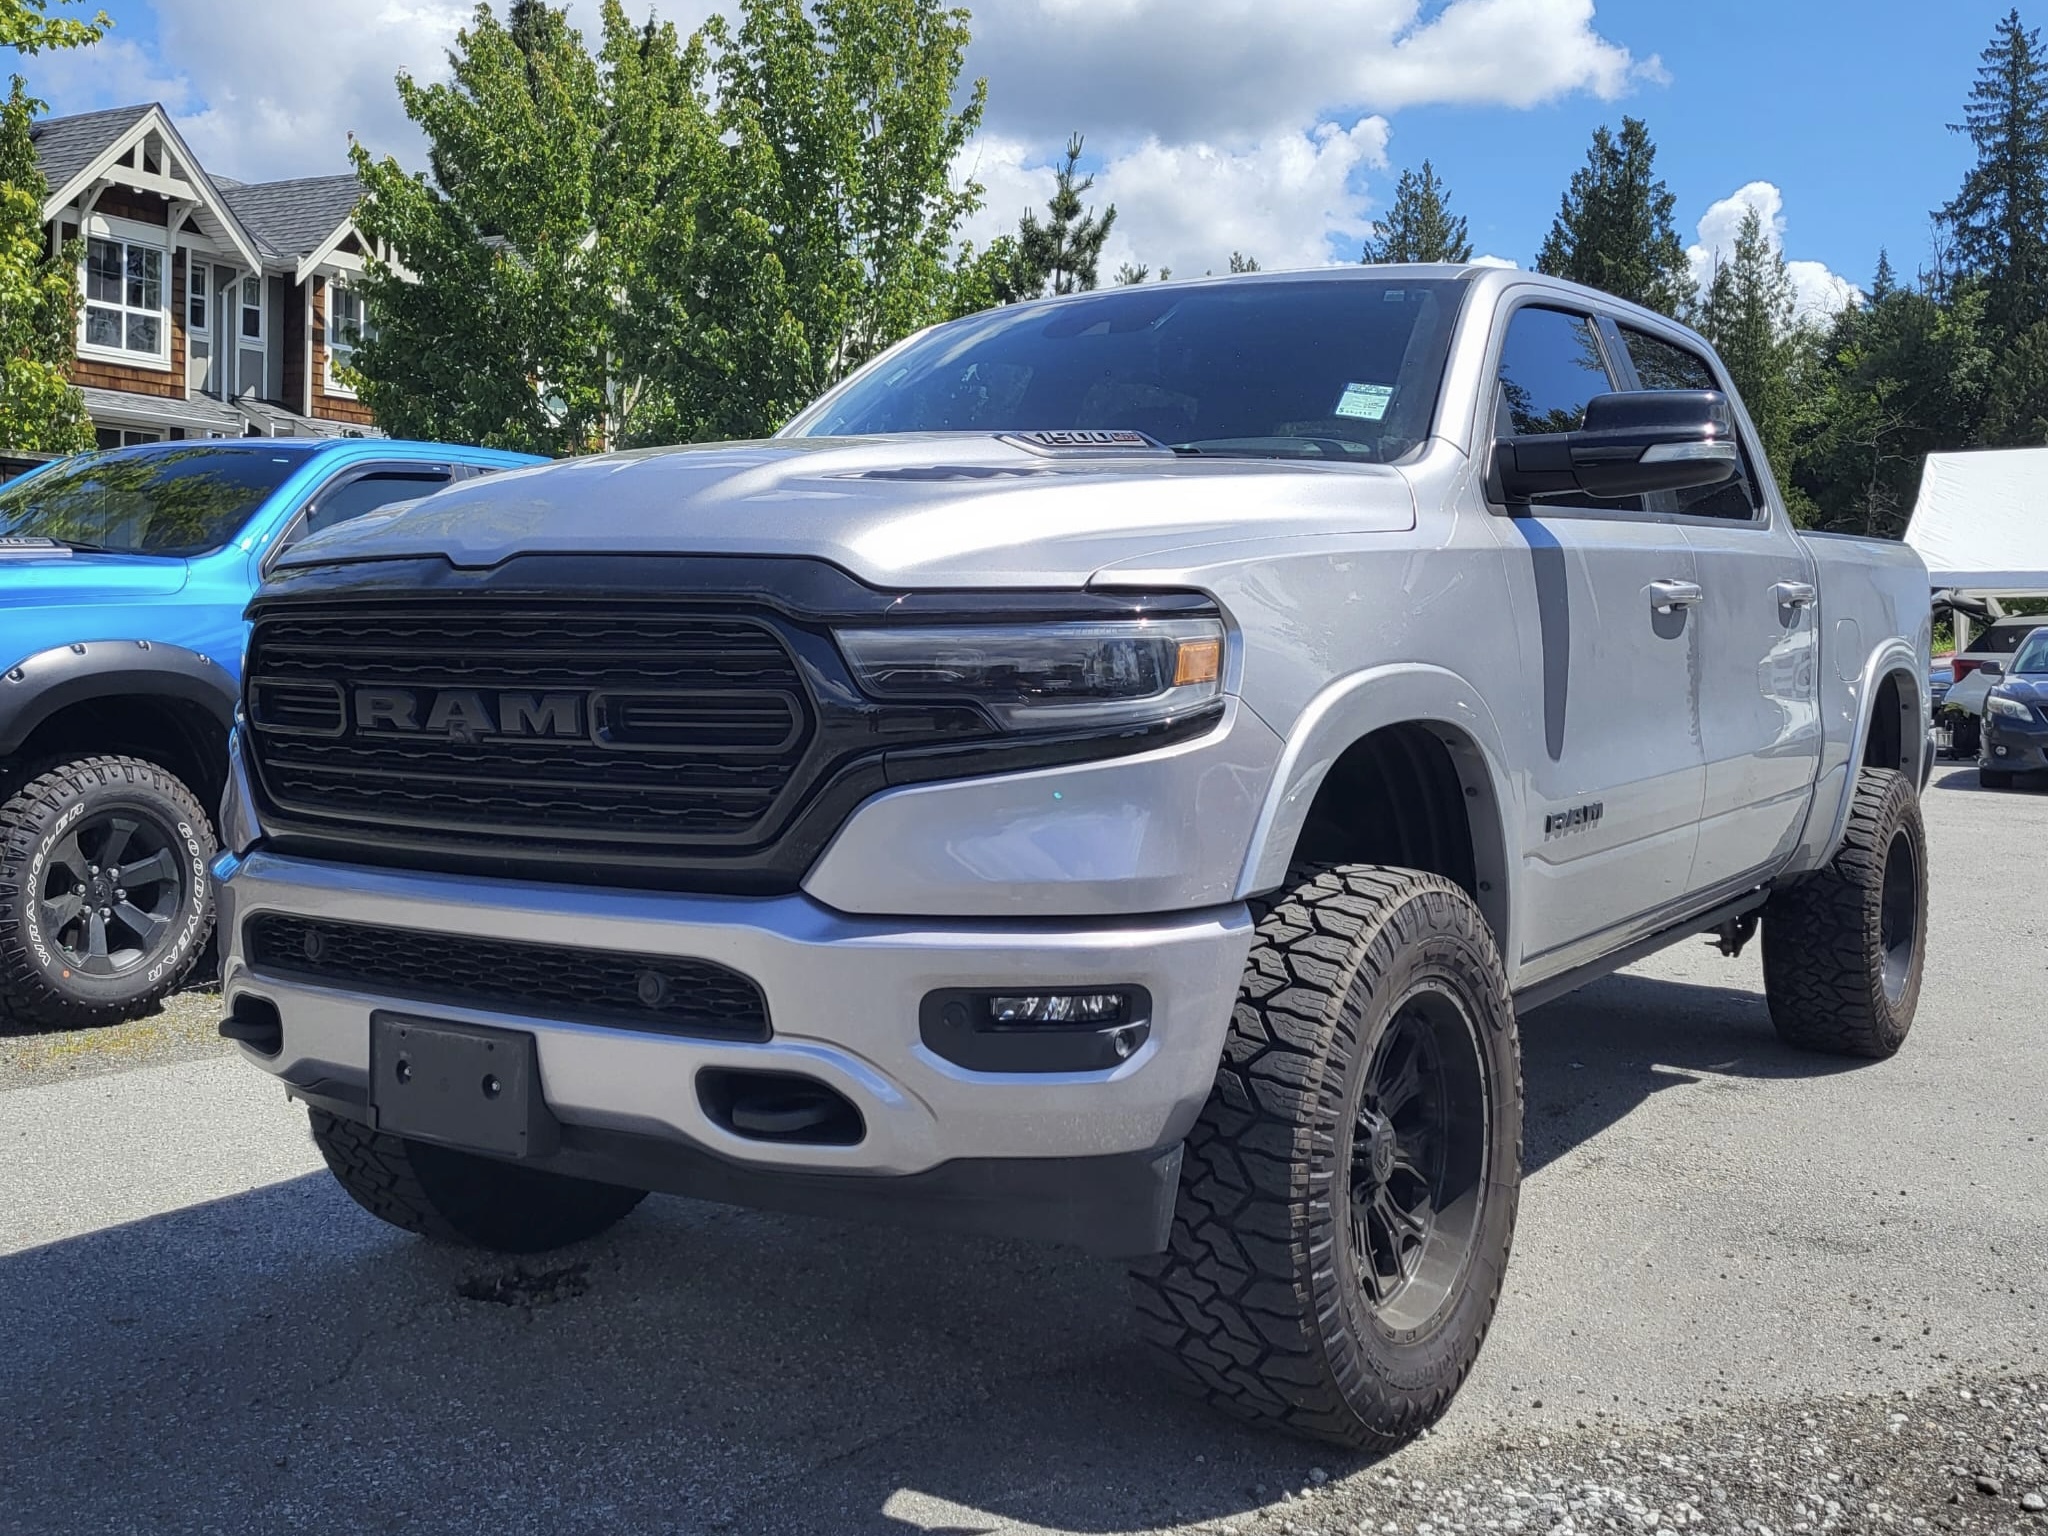 2022 Ram 1500 Limited - Night Edition, Ventilated Leather Seats